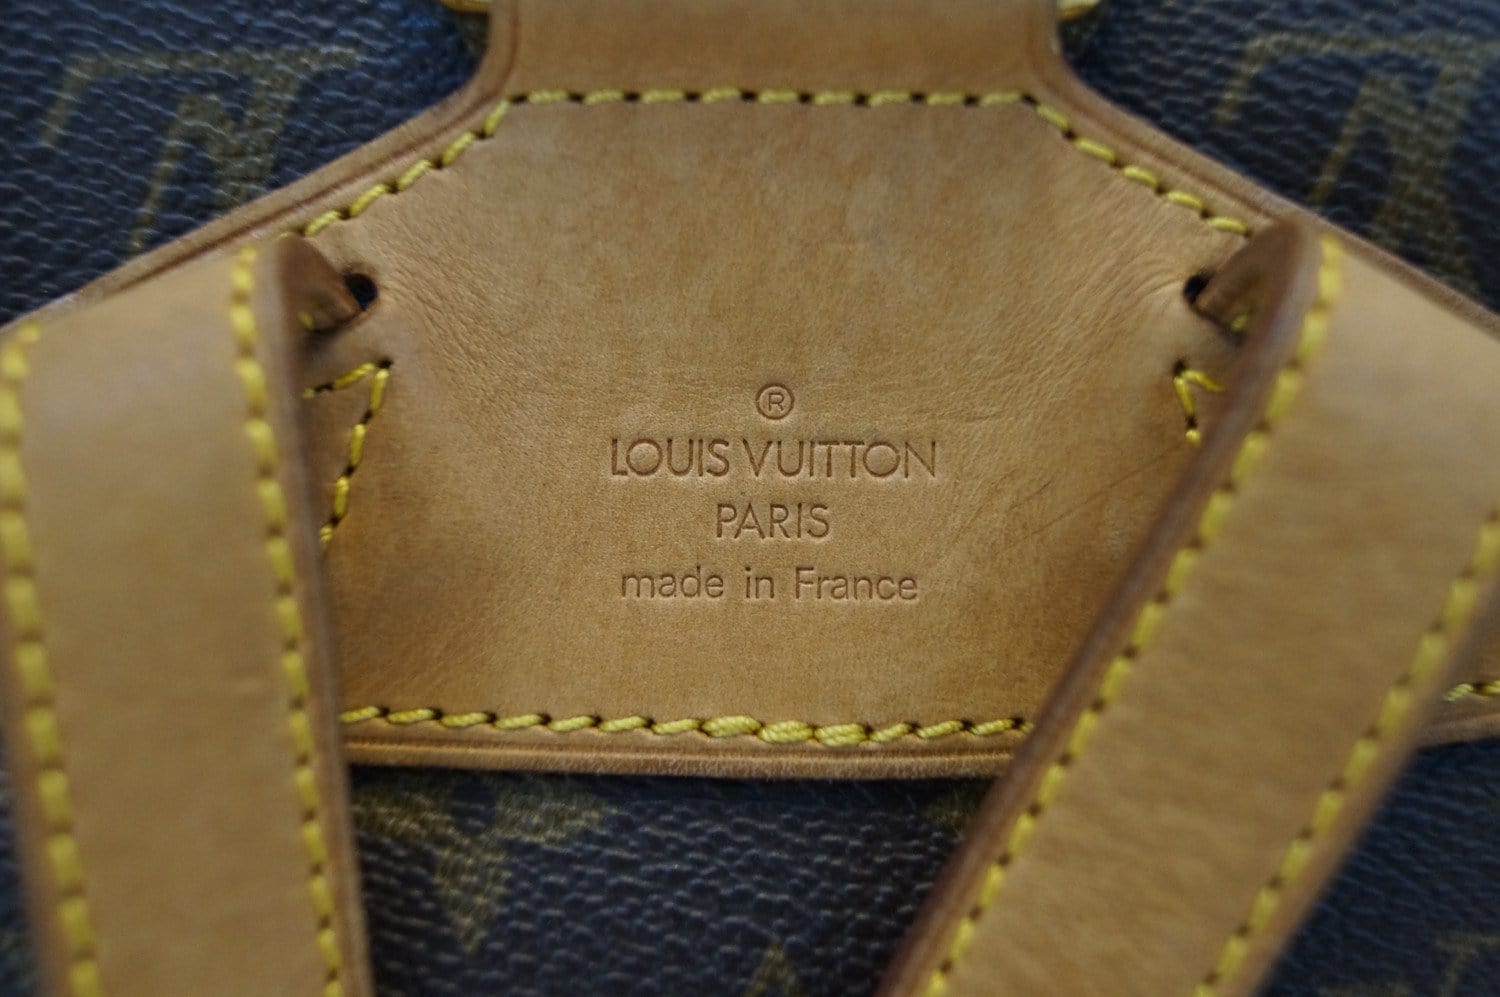 Louis Vuitton 2003 Montsouris MM Backpack Damier N51143 – AMORE